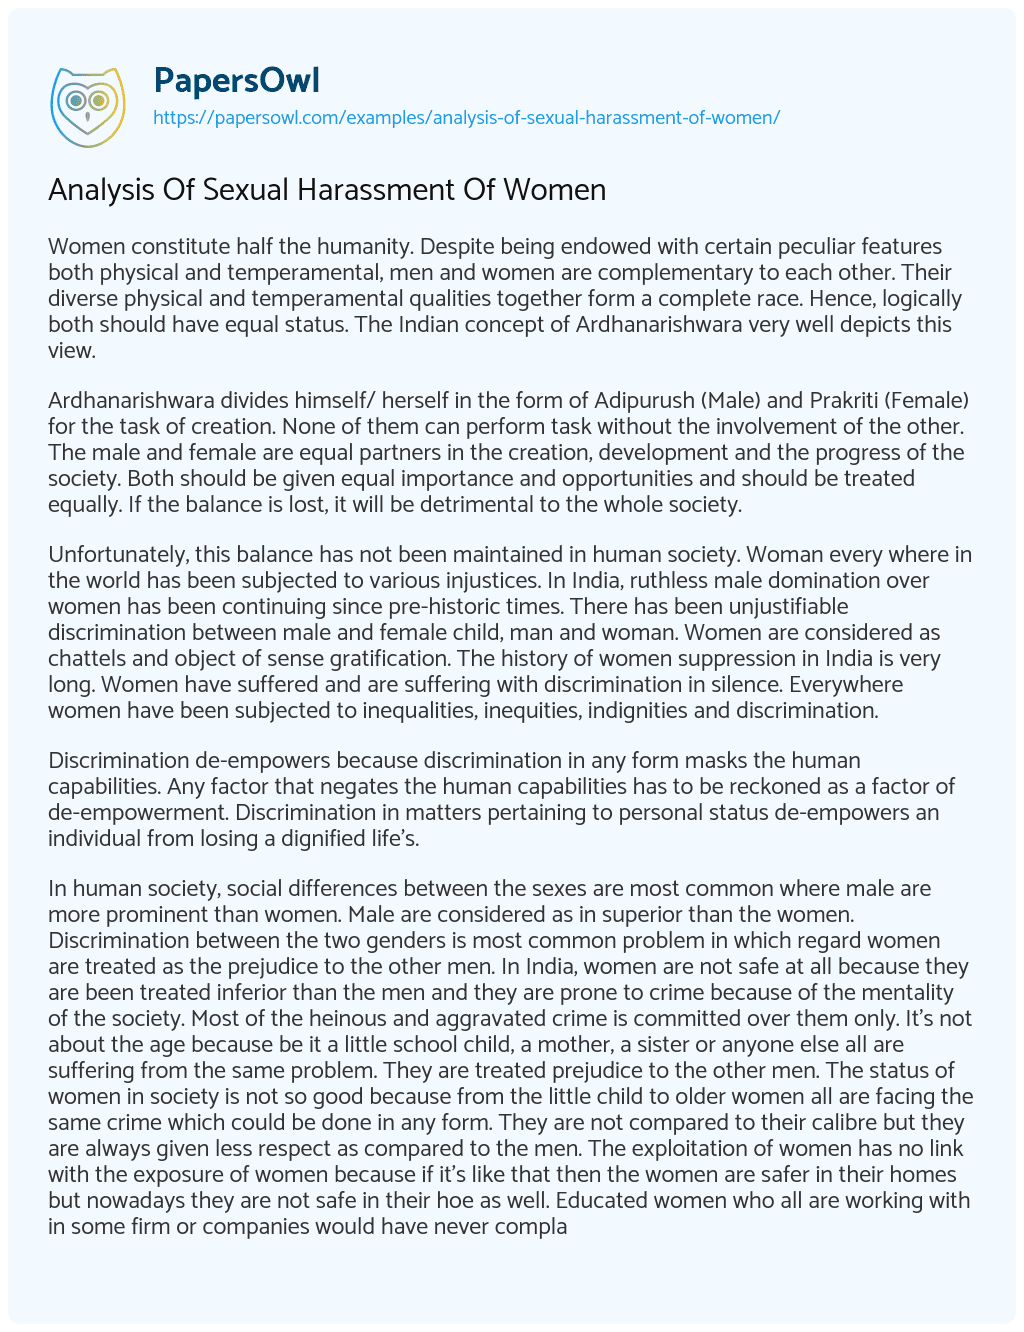 Essay on Analysis of Sexual Harassment of Women